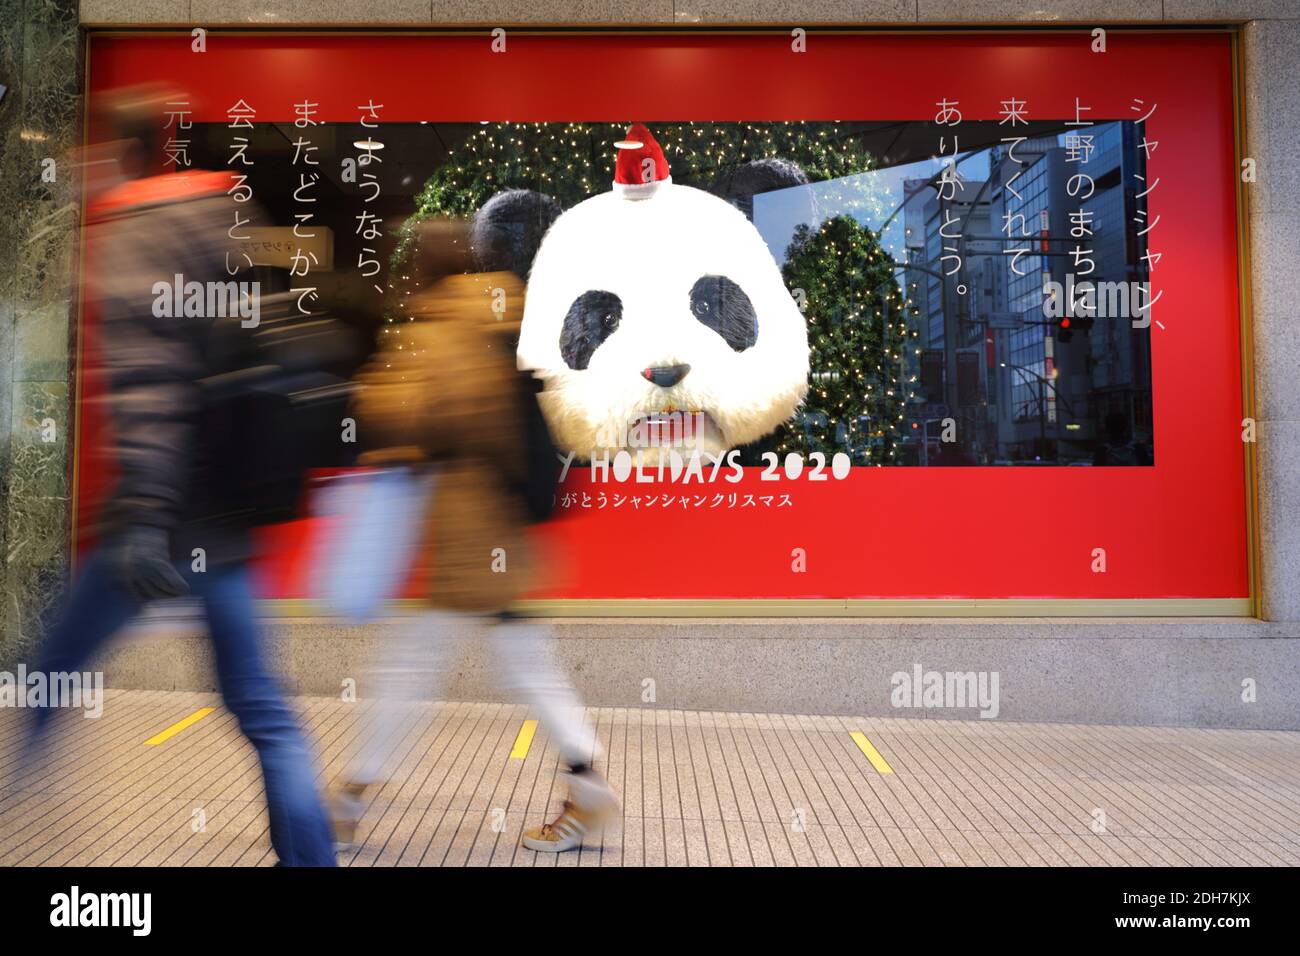 Thank-You celebration for popular female giant panda Xiang Xiang are displayed in Tokyo's Ueno area, Japan on December 9, 2020. Xiang Xiang is currently loaned to the Tokyo zoo by the Chinese government, and will be returned to China by December 31, 2020. (Photo by Naoki Nishimura/AFLO) Stock Photo